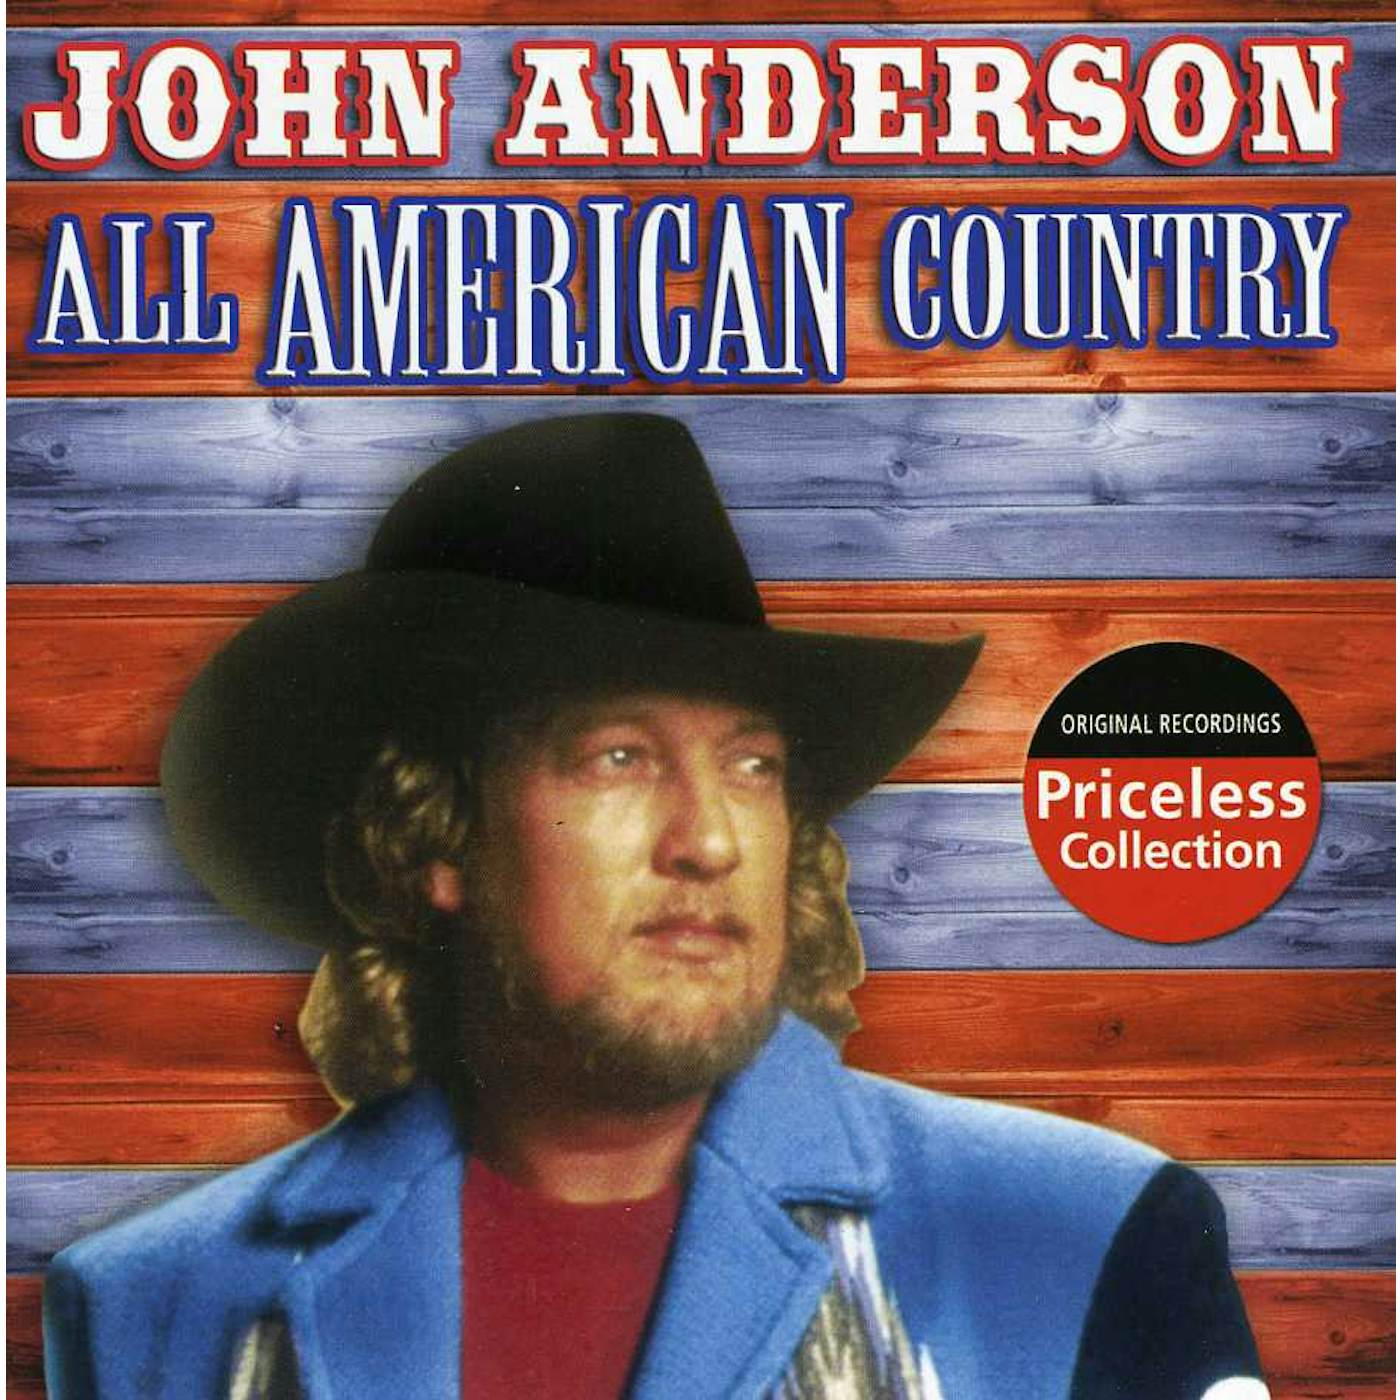 John Anderson ALL AMERICAN COUNTRY CD